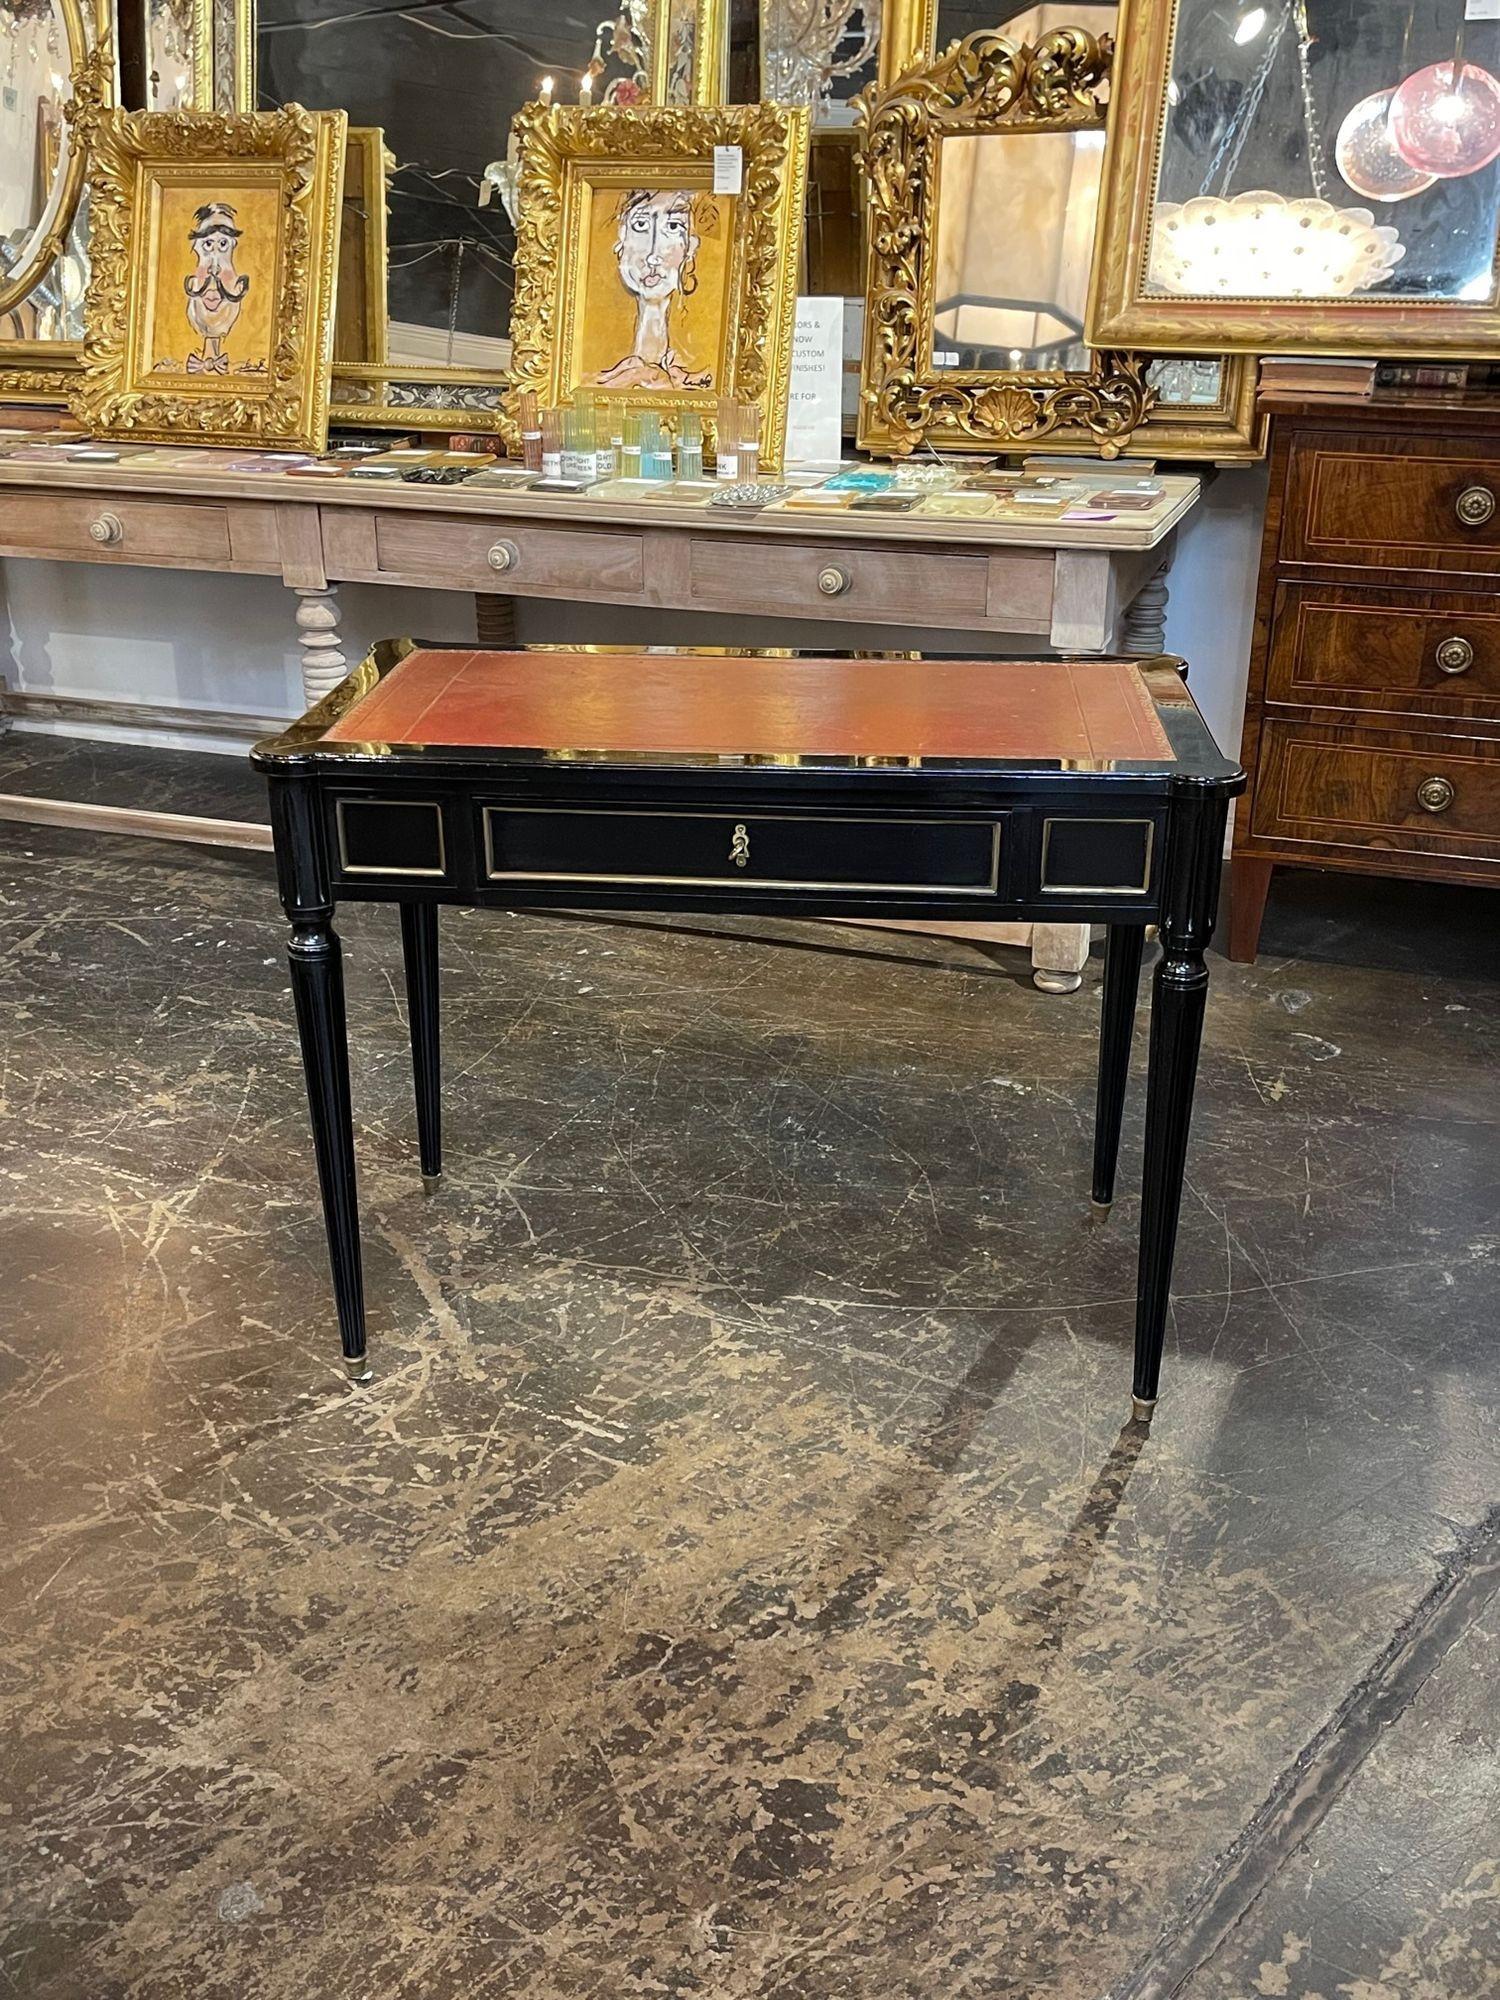 Handsome vintage Jansen style black lacquered writing desk. Beautiful clean lines with gold accents and a leather top. Adds a real touch of elegance!.